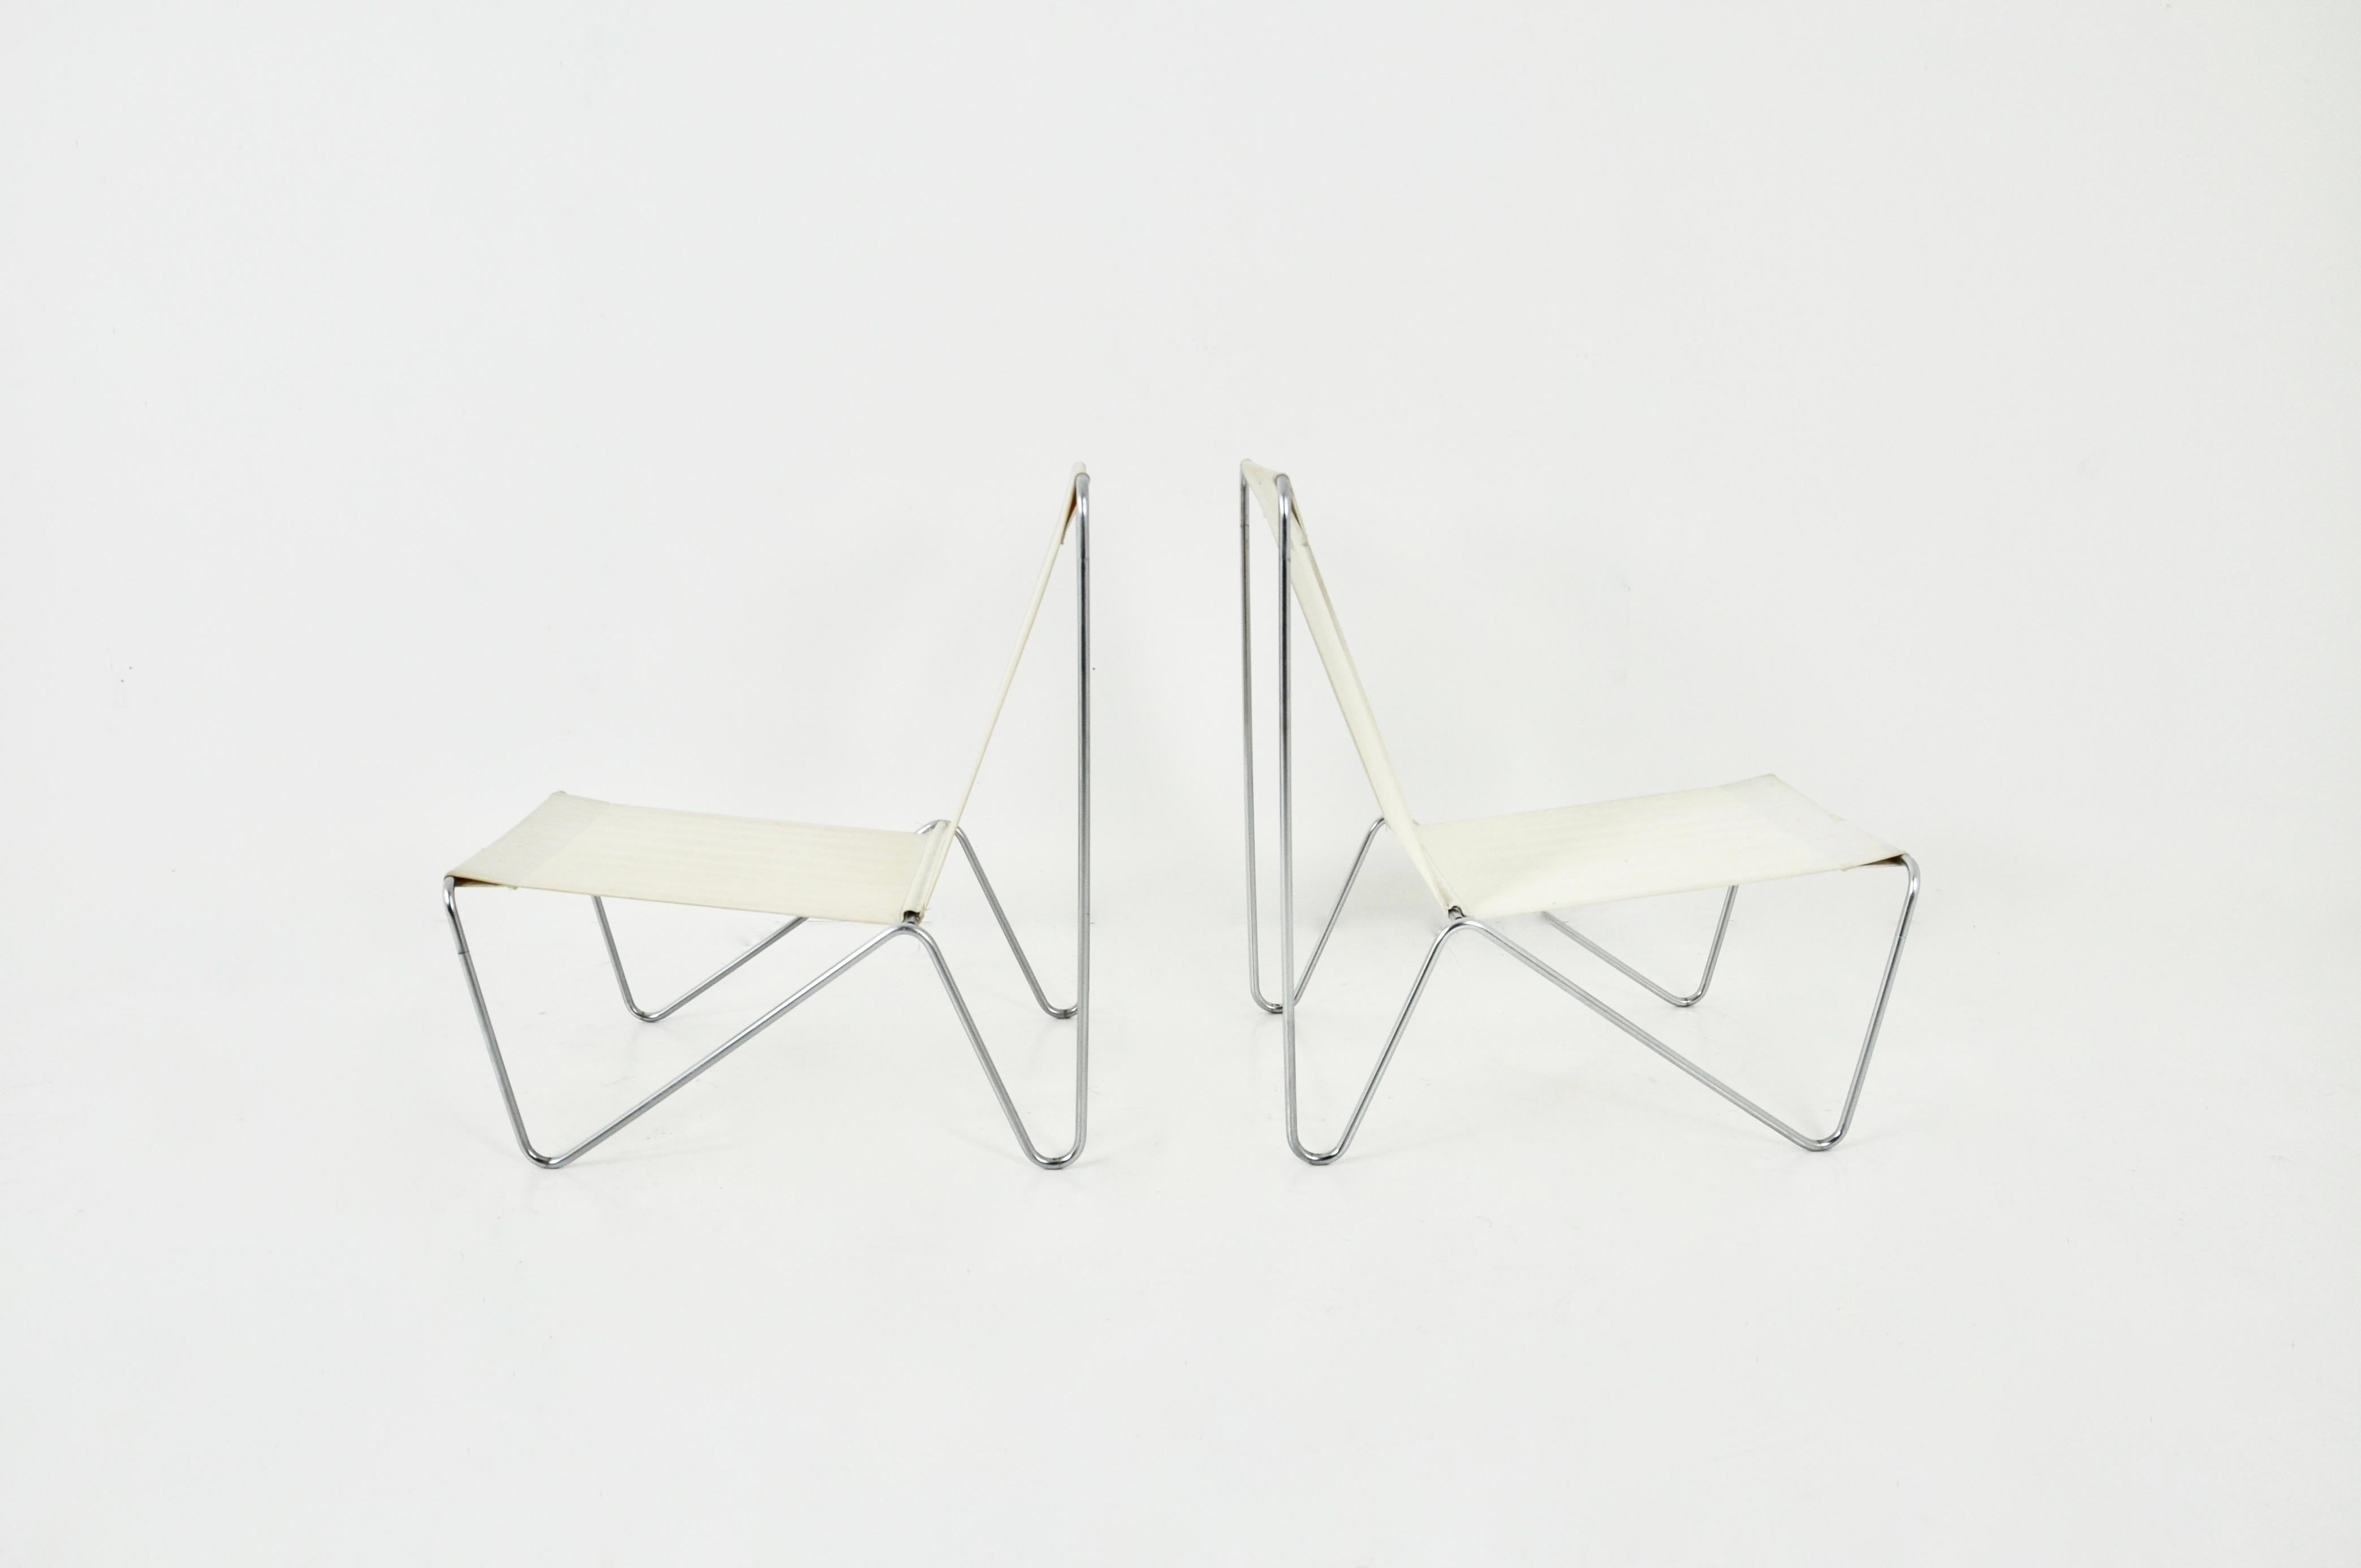 Aluminum Pair of Bachelor chairs by Verner Panton for Fritz Hansen, 1950s